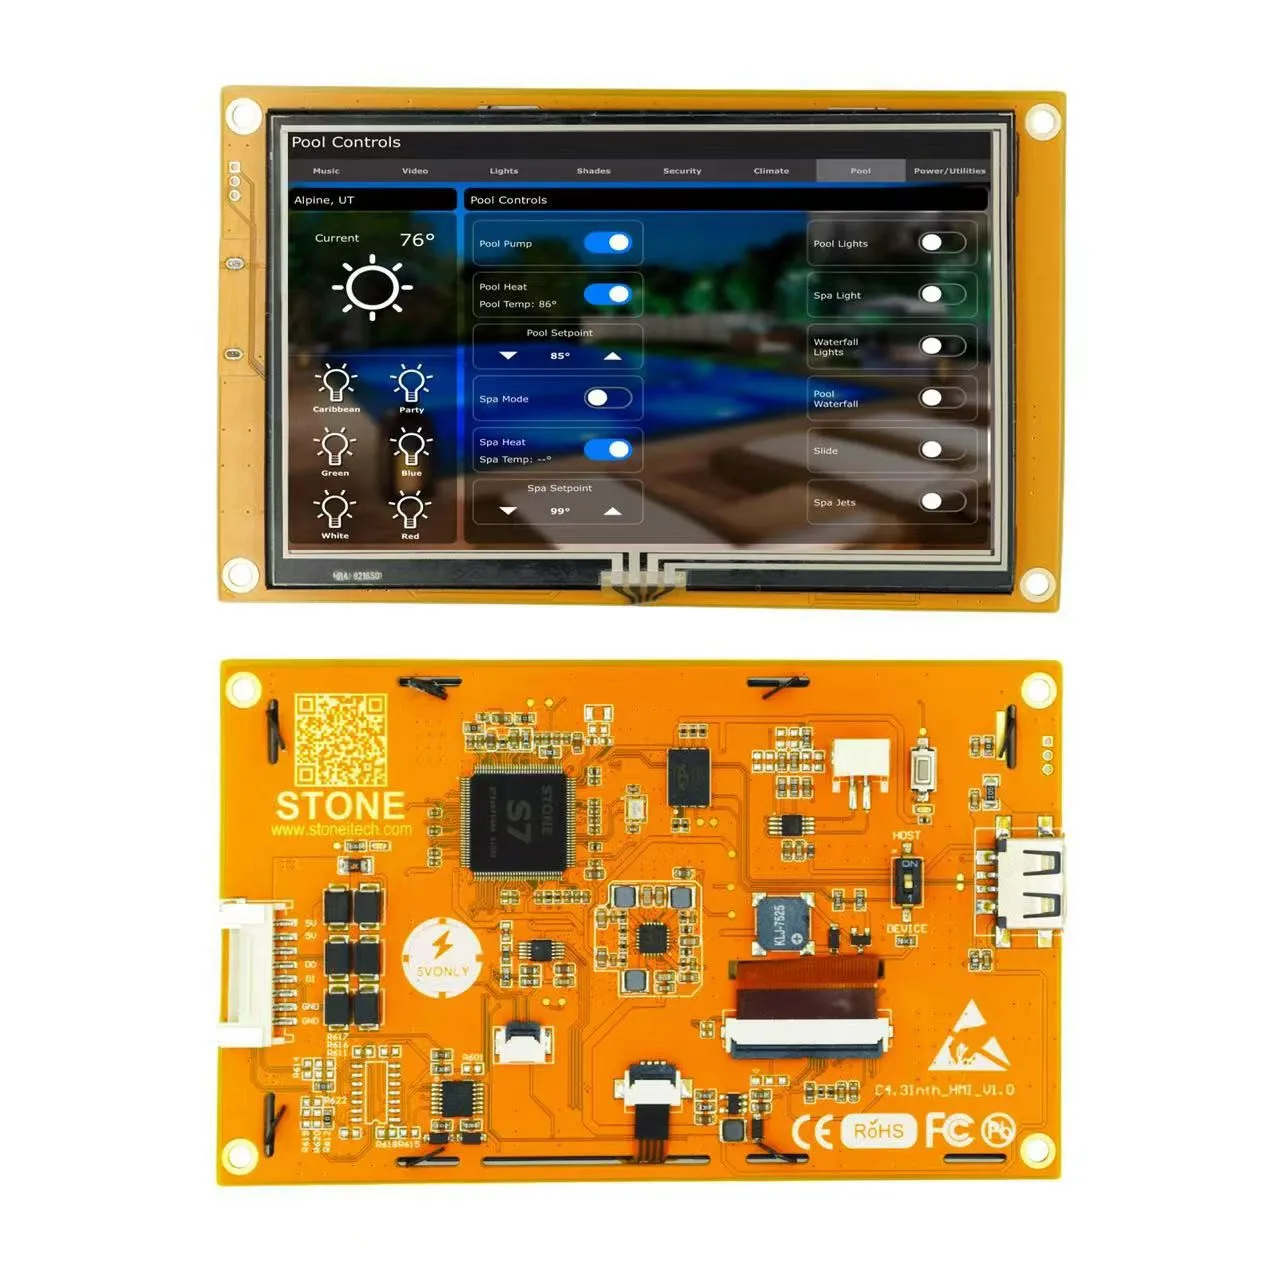 SCBRHMI 4.3 Inch LCD-TFT HMI Display Resistive Touch Panel Module Intelligent Series RGB 65K Color With Enclosure